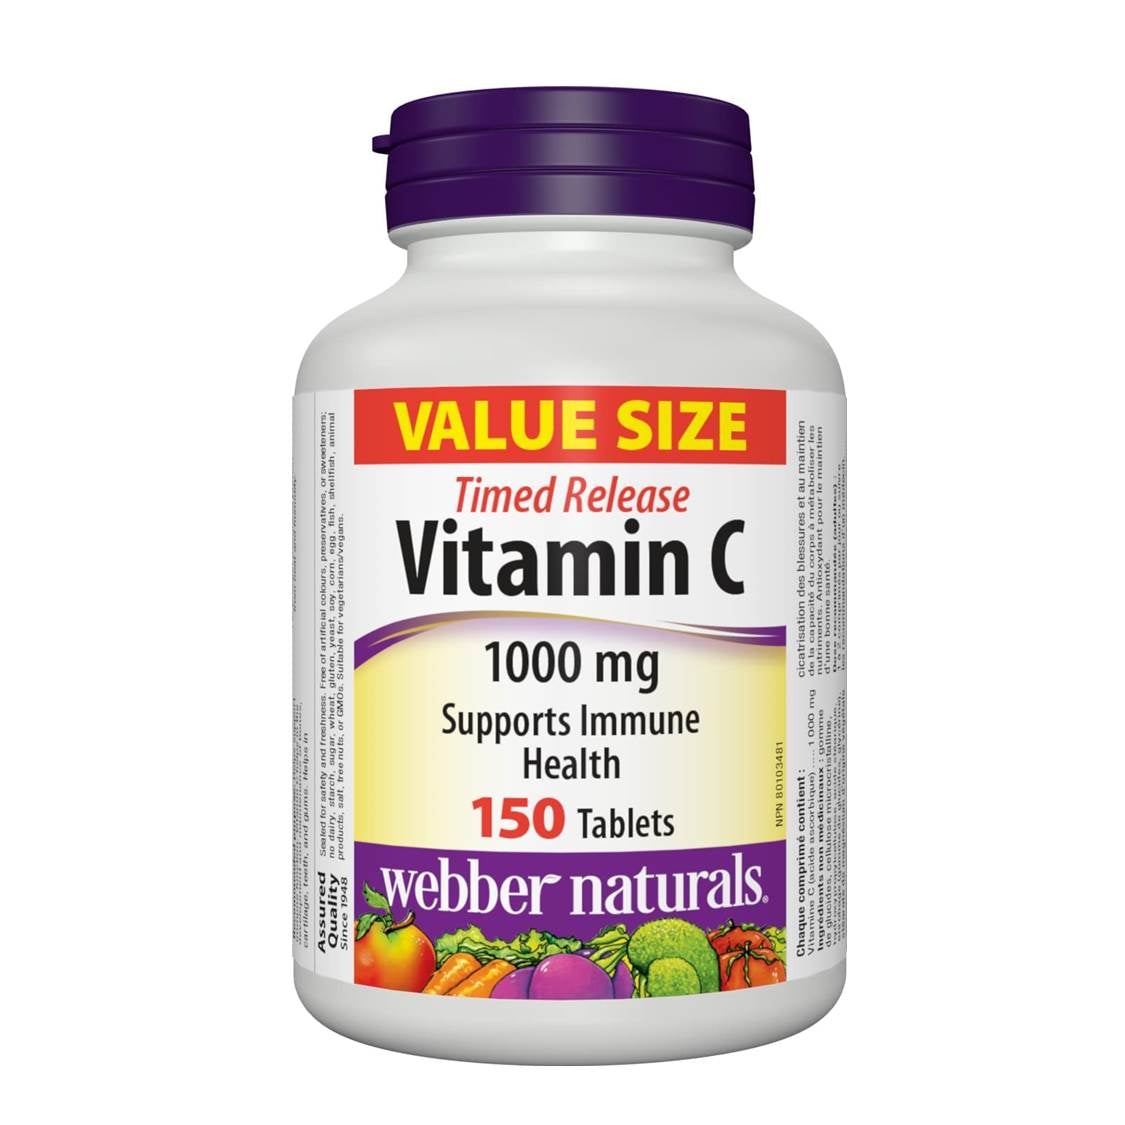 webber-naturals-vitamin-c-timed-release-1000mg-150tablets-newpackage